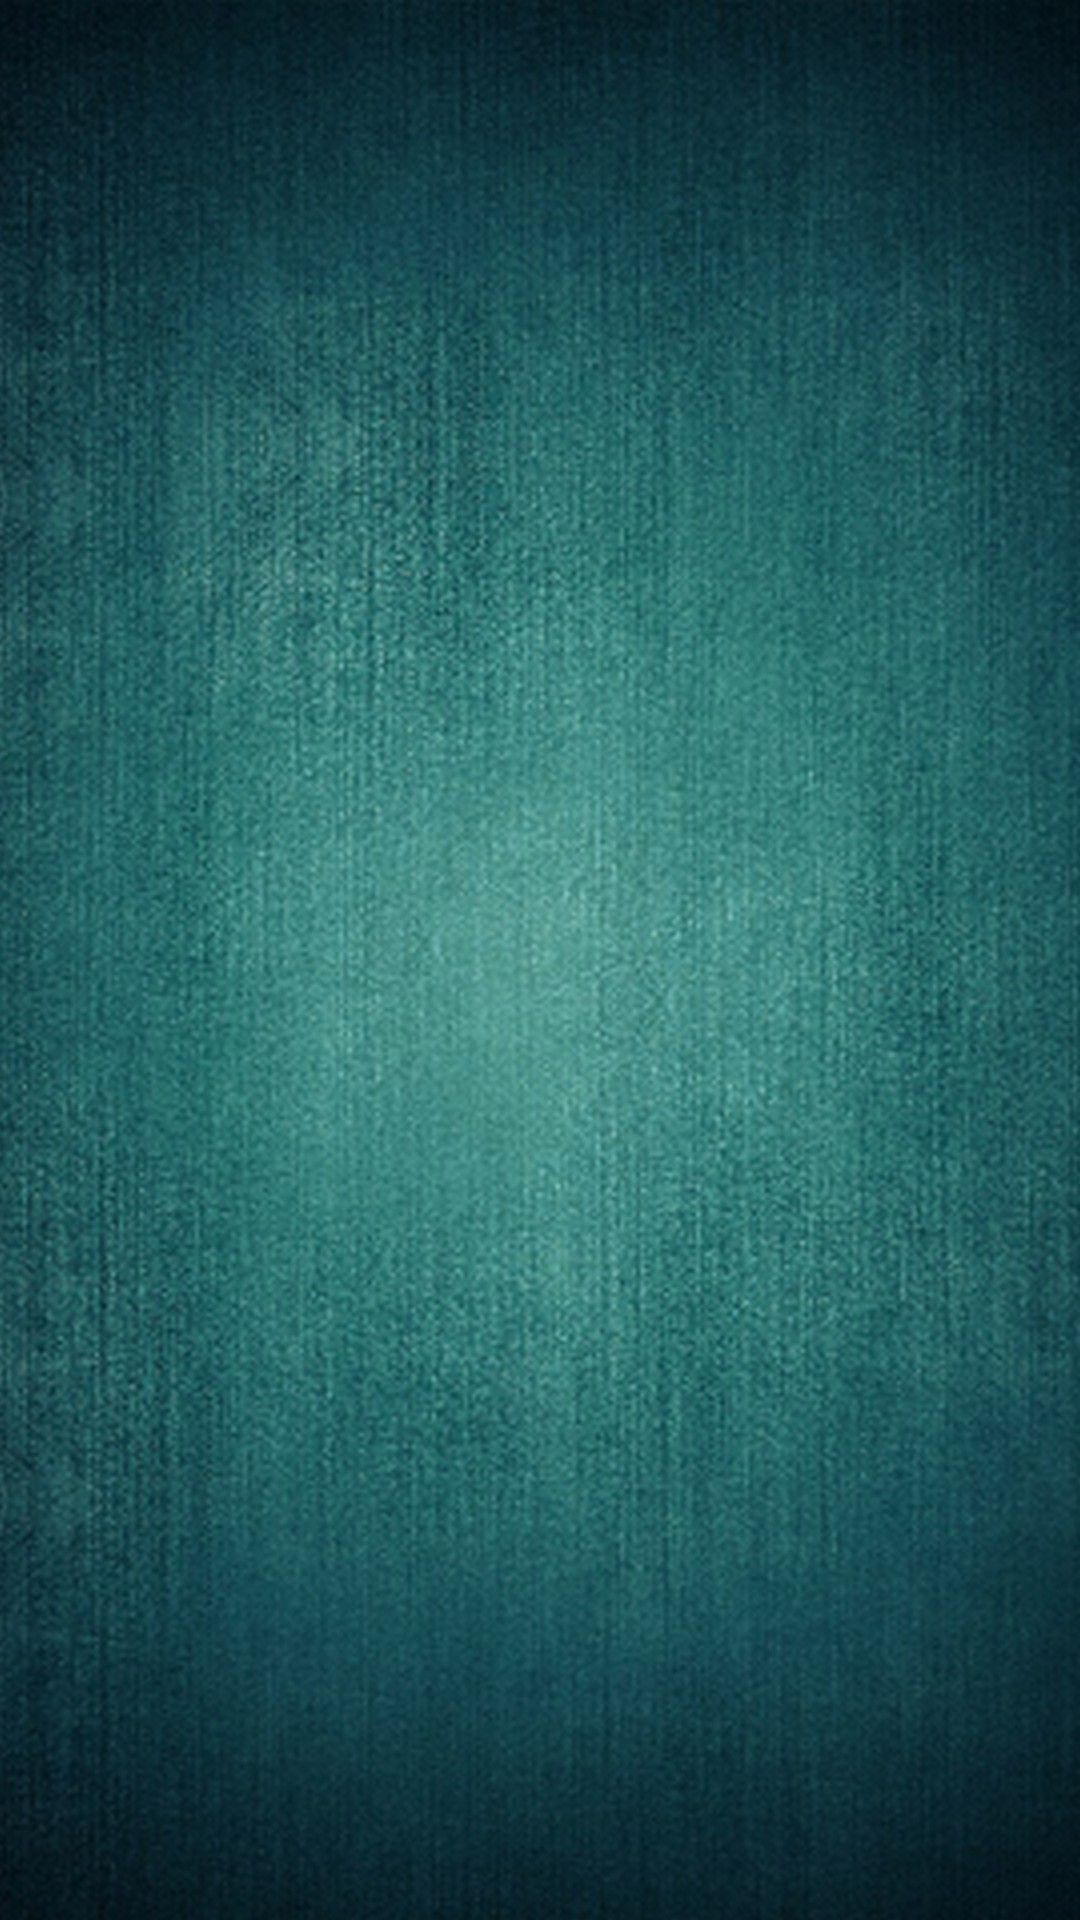 iPhone 7 Wallpaper Teal Color with image resolution 1080x1920 pixel. You can make this wallpaper for your iPhone 5, 6, 7, 8, X backgrounds, Mobile Screensaver, or iPad Lock Screen